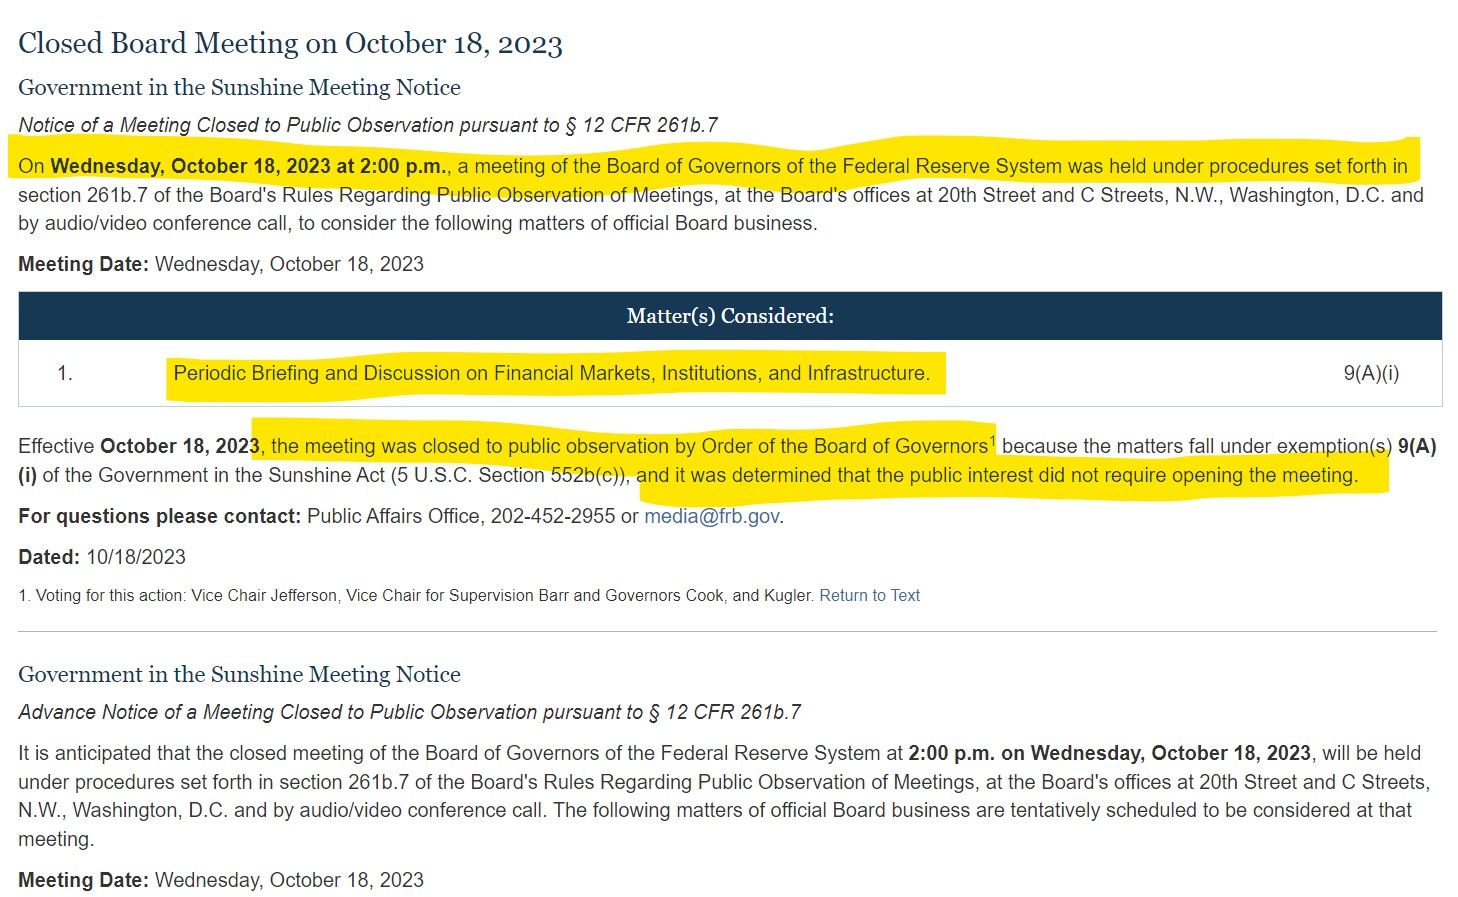 Closed Board Meeting on October 18, 2023